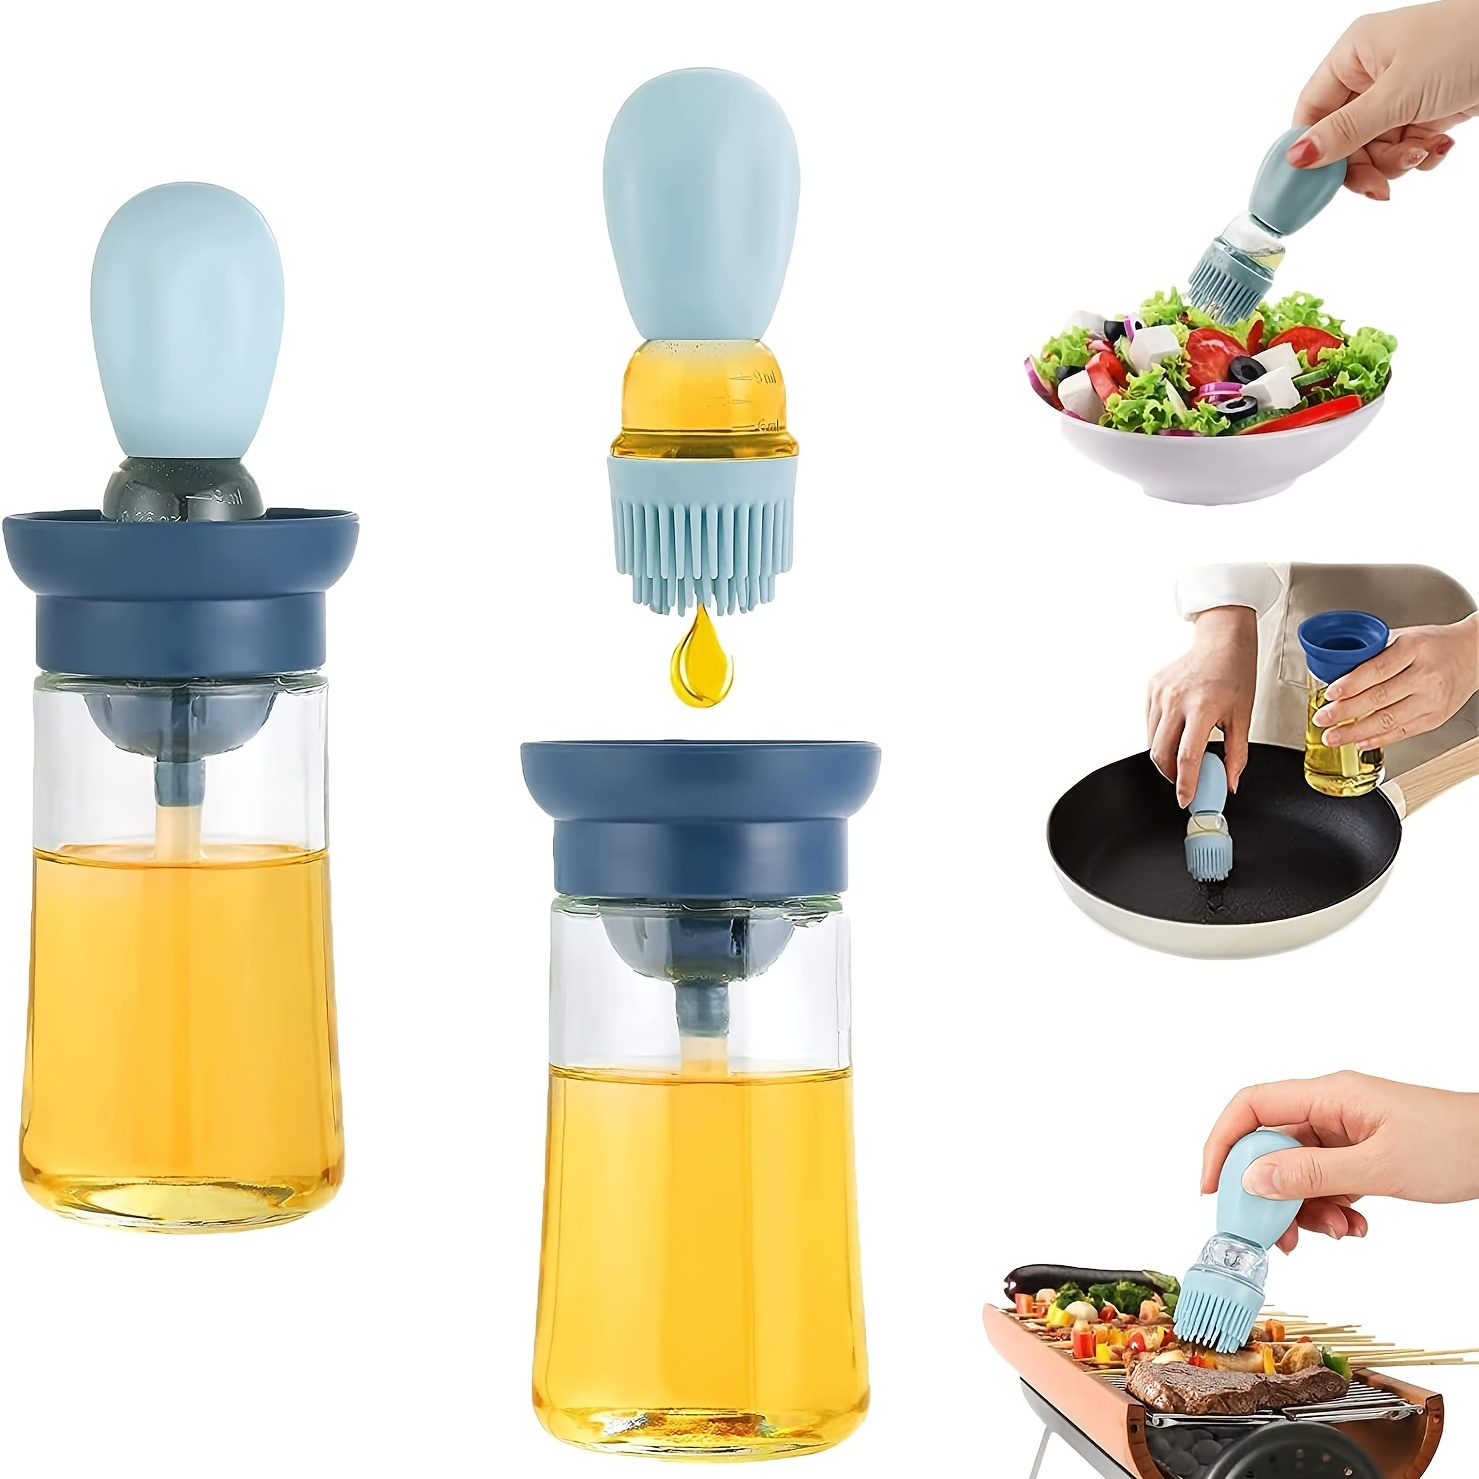 

1pc Oil Bottle Glass Olive Oil Dispenser Bottle For Kitchen With Brush Brush Squeeze Oil 2 In 1 Silicone Dropper Measuring Oil Dispenser For Cooking Fry Baking Bbq Gift For Mom Kitchen Accessaries